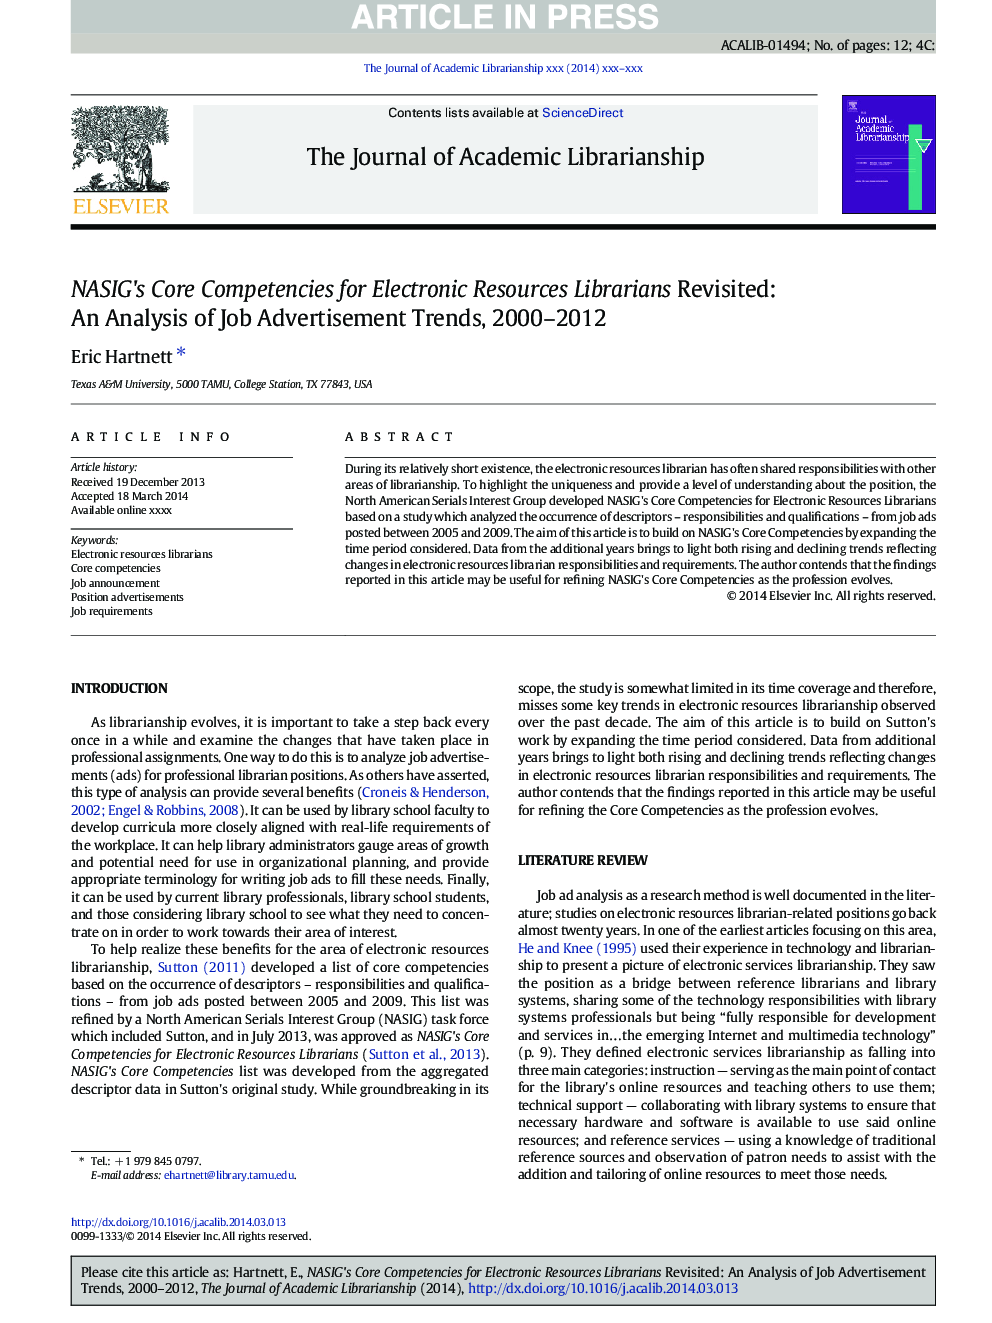 NASIG's Core Competencies for Electronic Resources Librarians Revisited: An Analysis of Job Advertisement Trends, 2000-2012